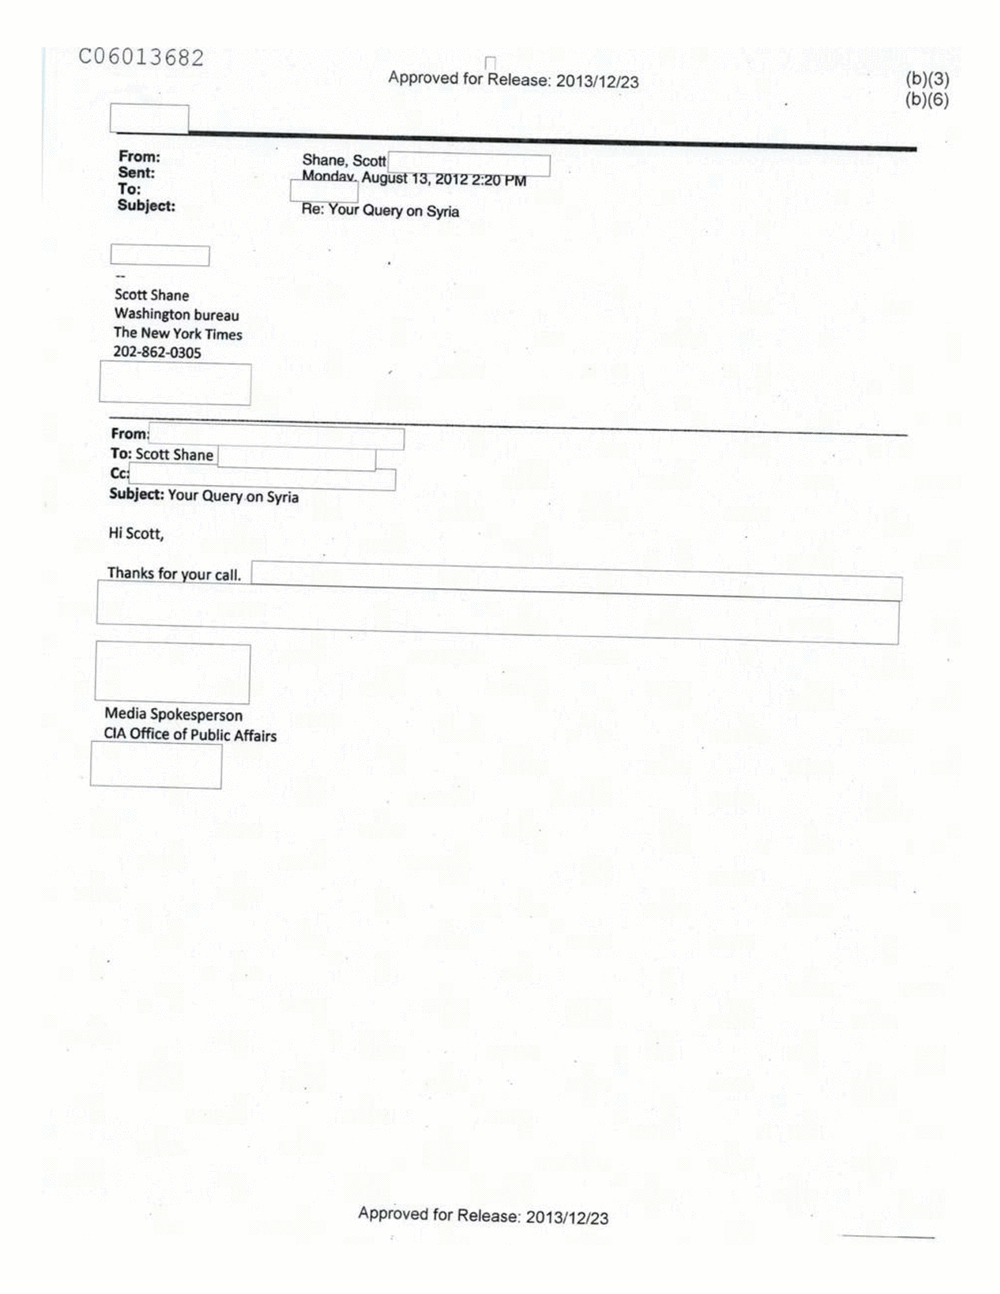 Page 539 from Email Correspondence Between Reporters and CIA Flacks